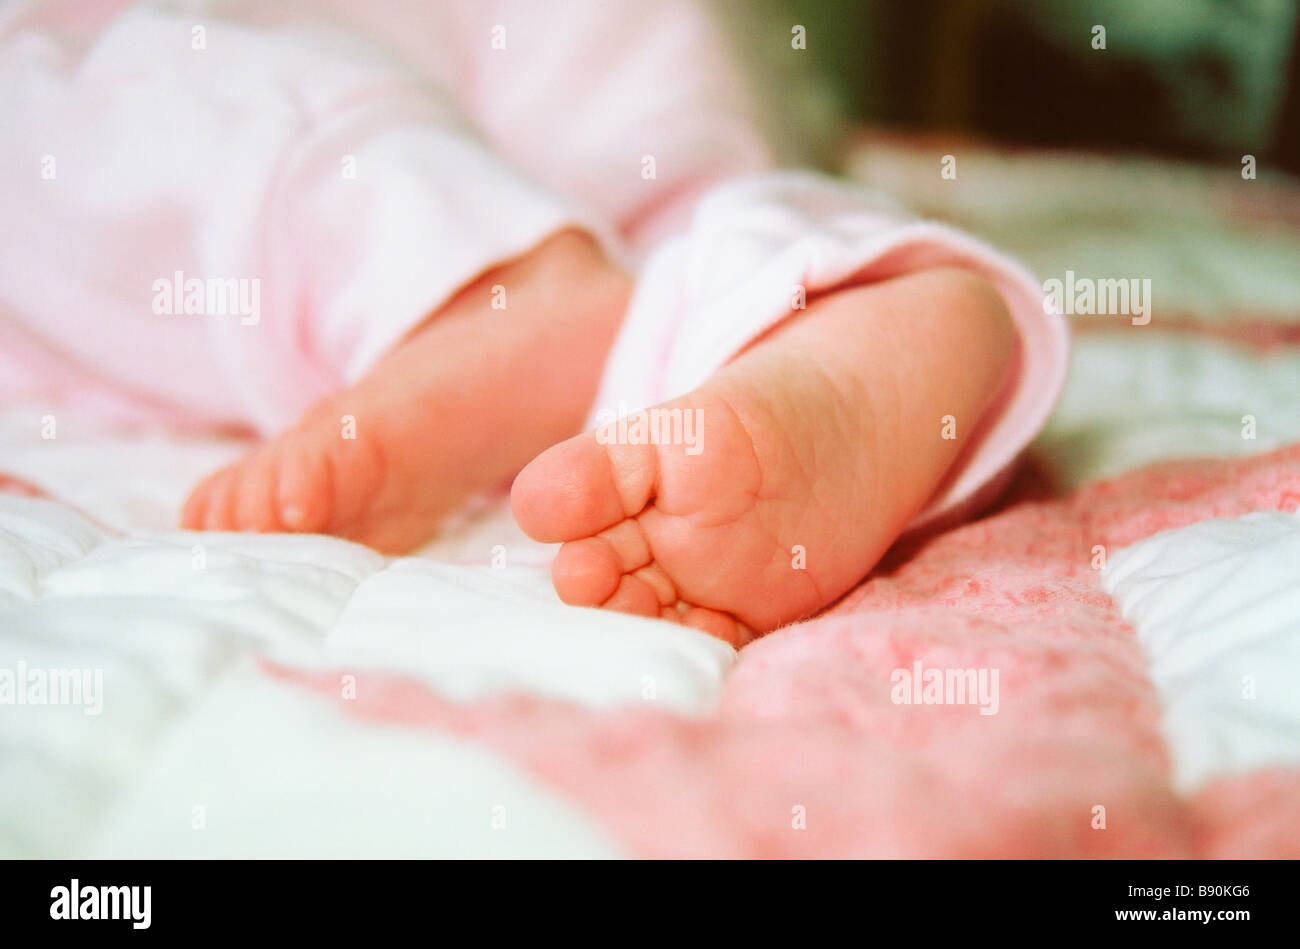 FV3995, Silver Parrot ; Baby Feet Stock Photo